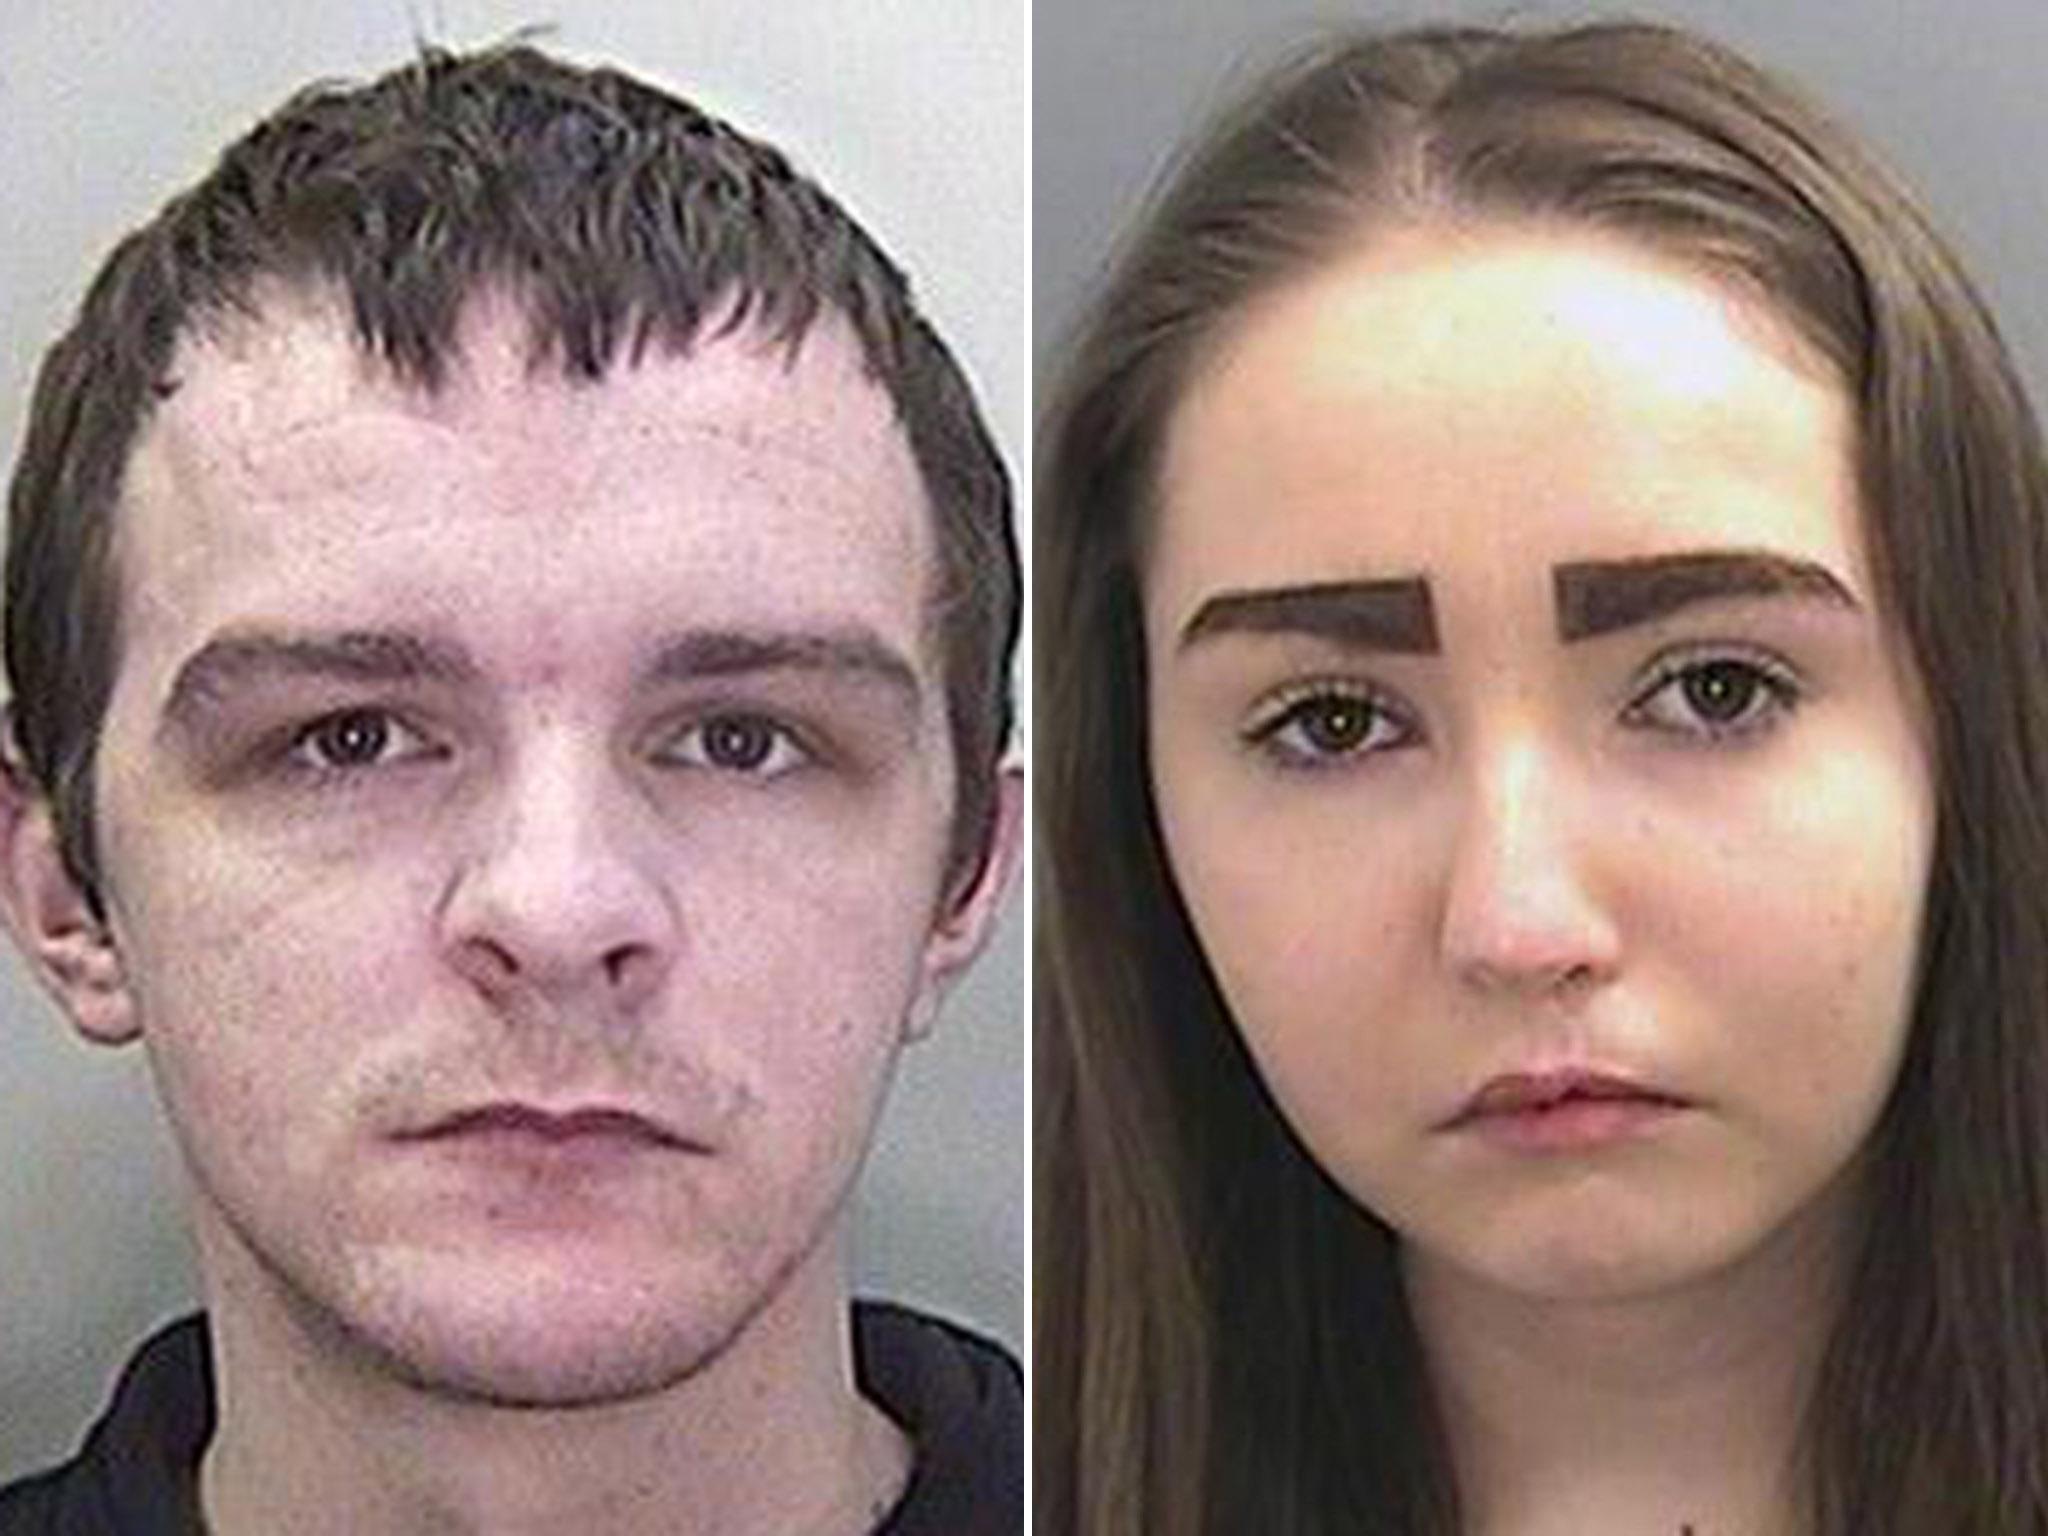 Matthew Thatcher and half-sister Emily Thomson engaged in category A sexual abuse of underage children